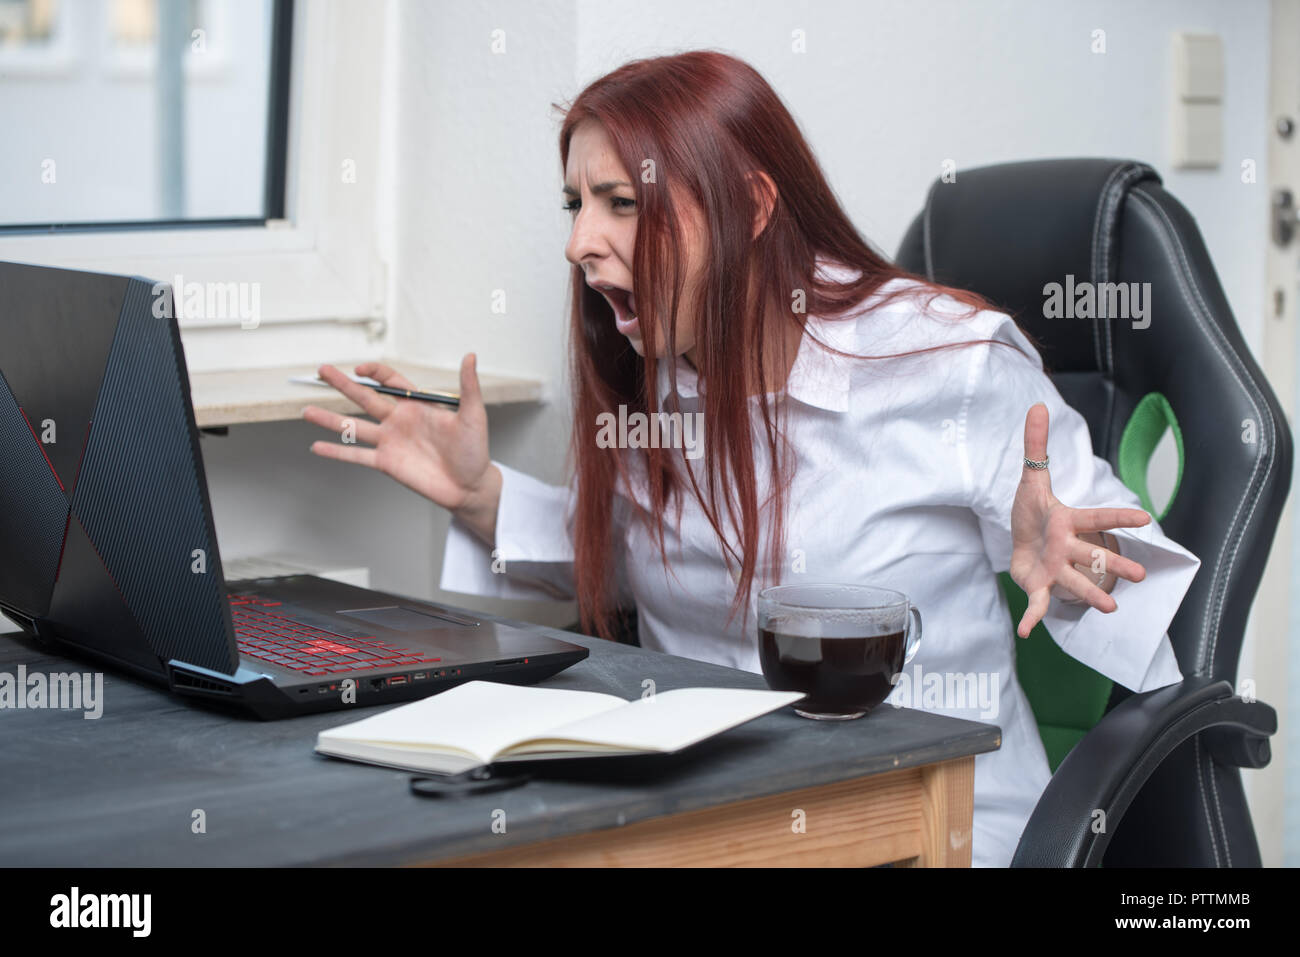 stressed, angry young woman sitting at a desk and screaming at the computer Stock Photo